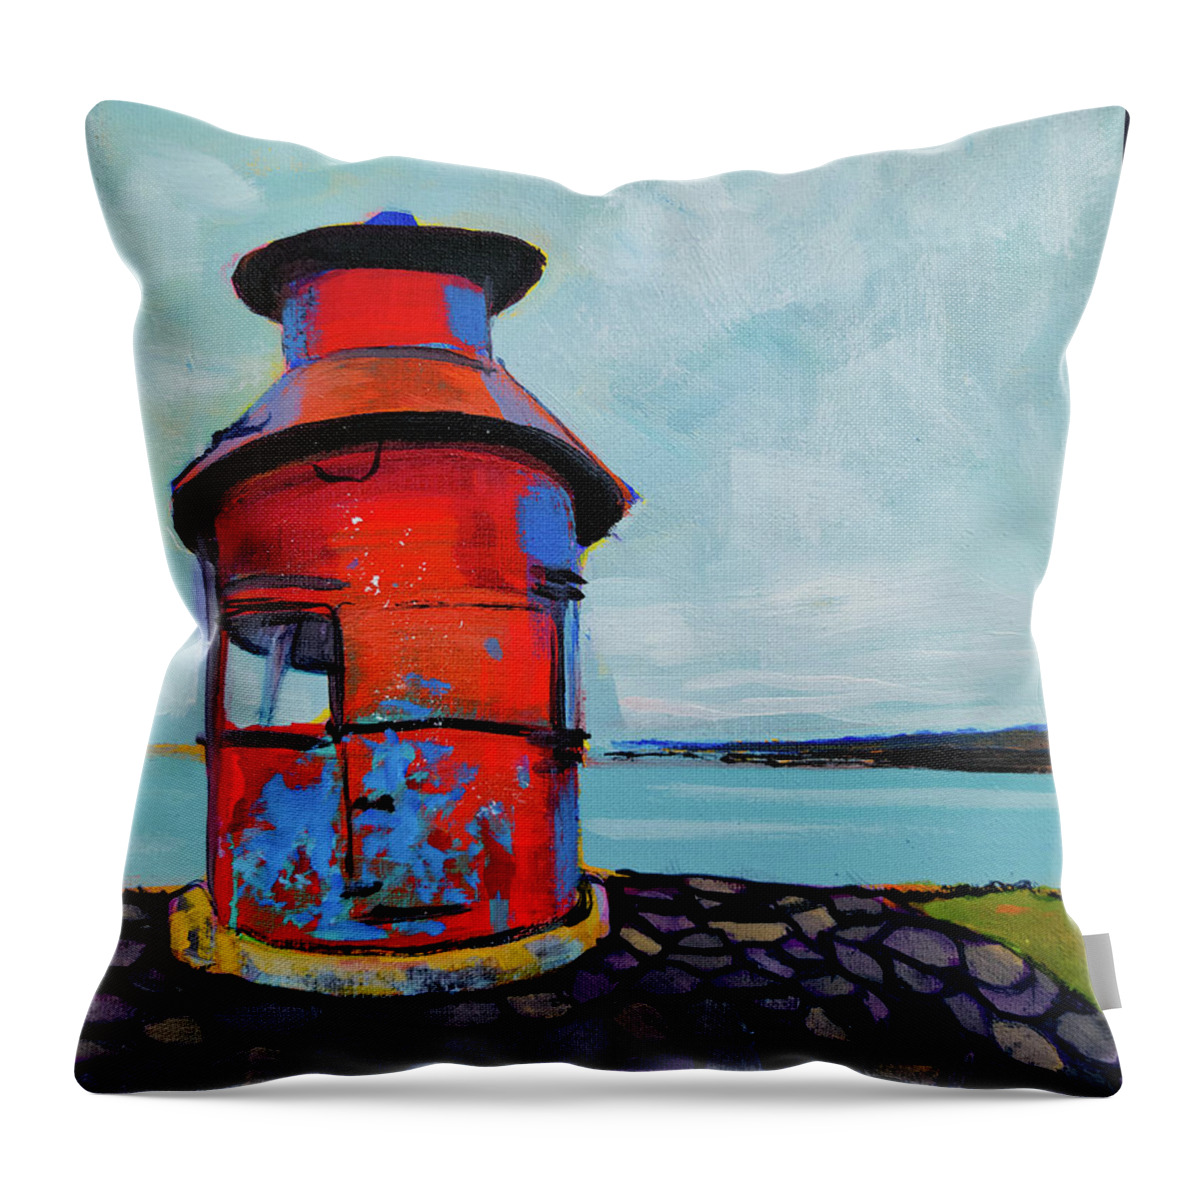  Throw Pillow featuring the painting Sugandisey Island Lighthouse by Madeline Dillner